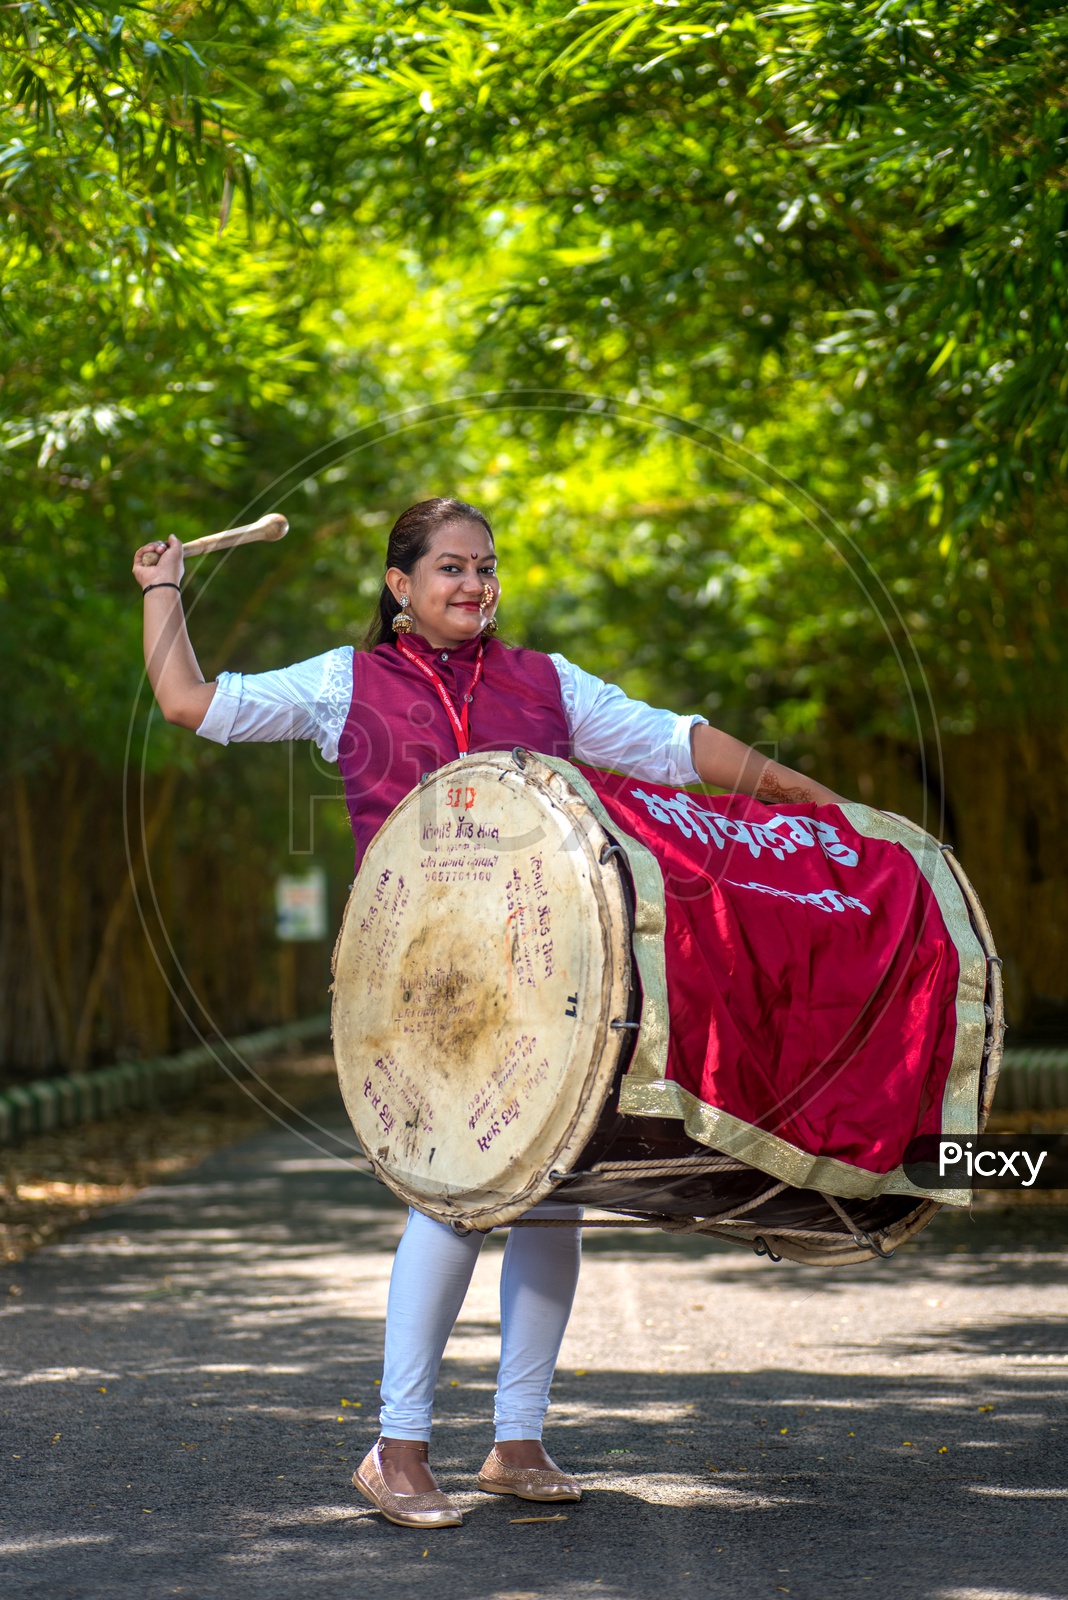 Great Maratha Dol Tasha Pathaks With Drums In a Local Park Playing Drums and Celebrating The Festival With Music